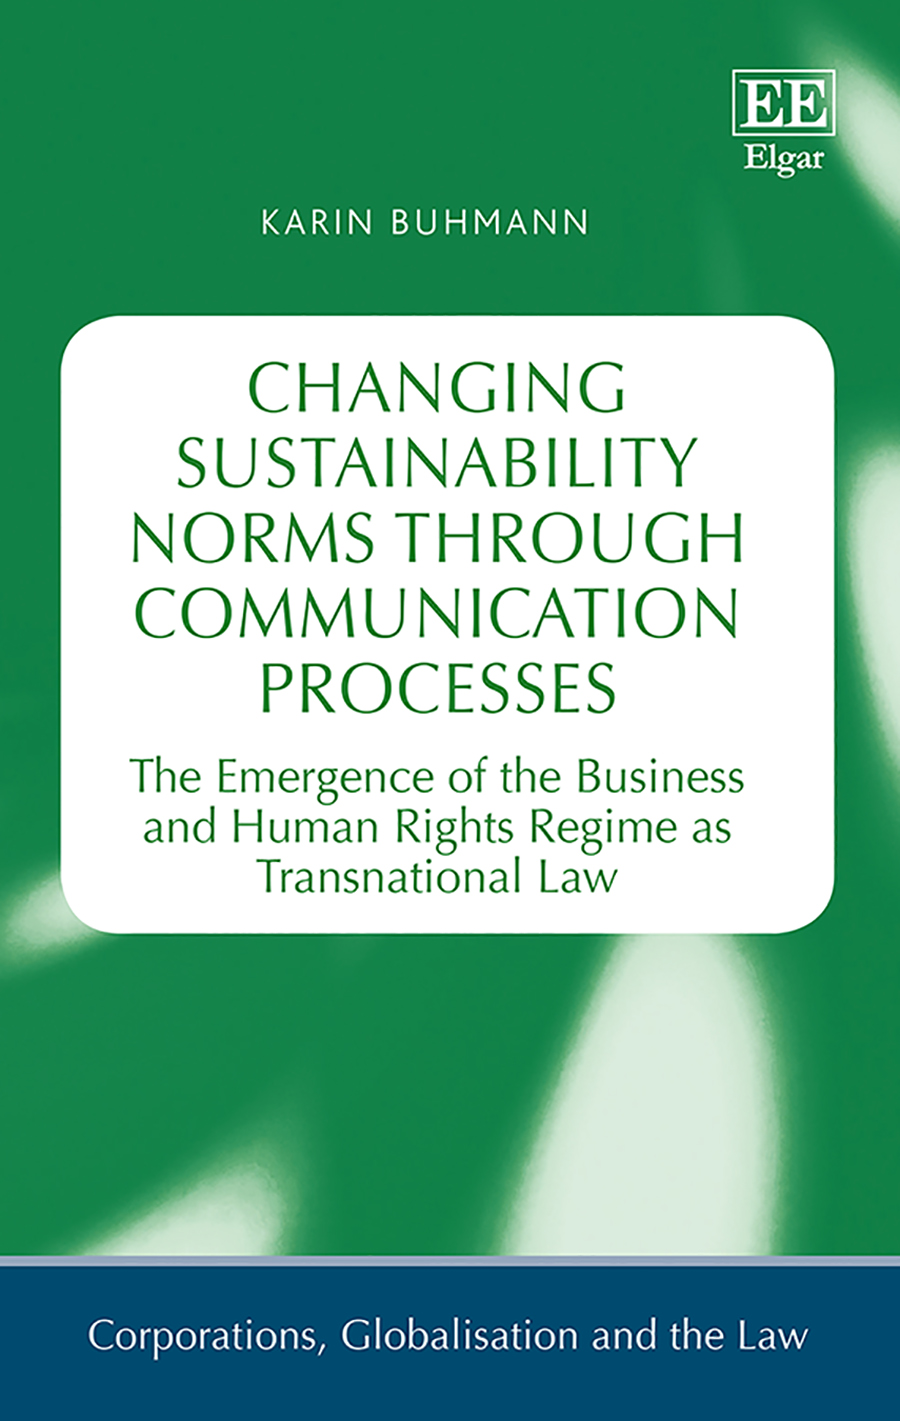 Changing Sustainability Norms through Communication Processes